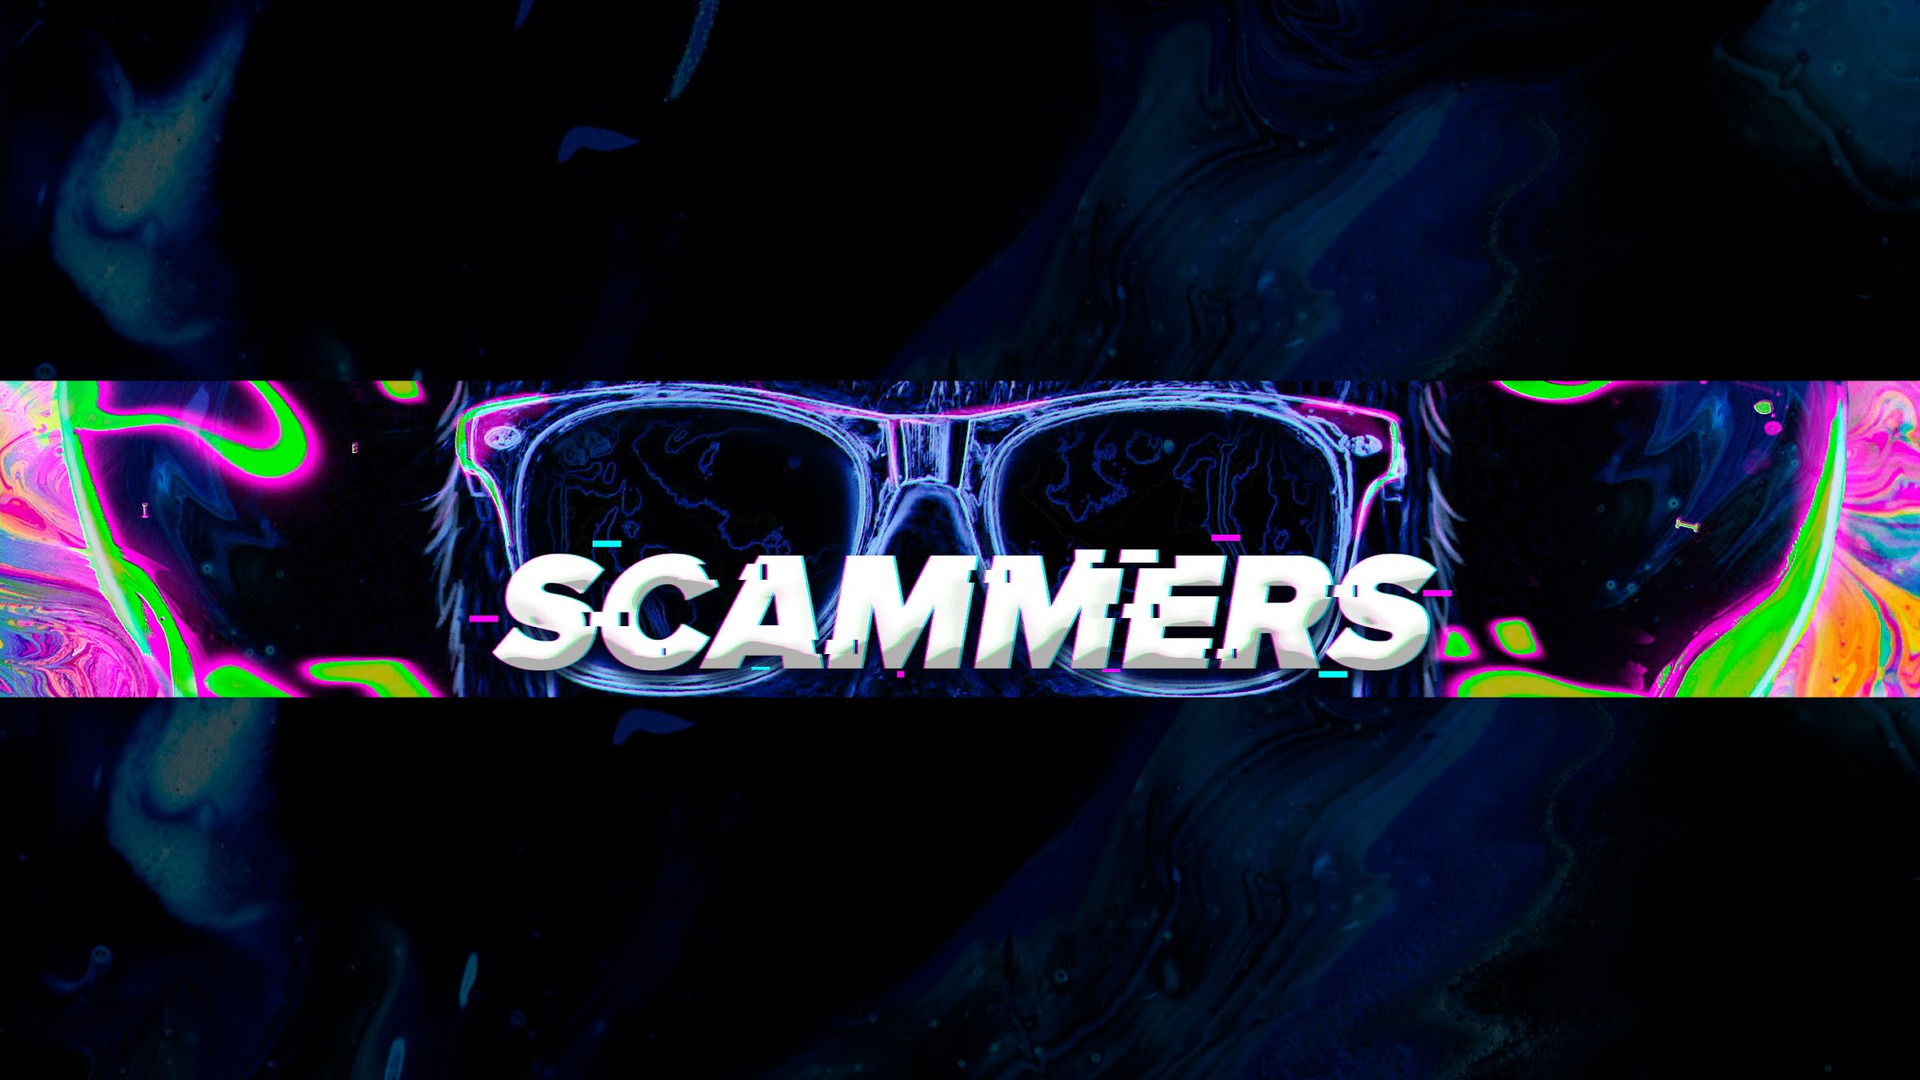 Show Scammers